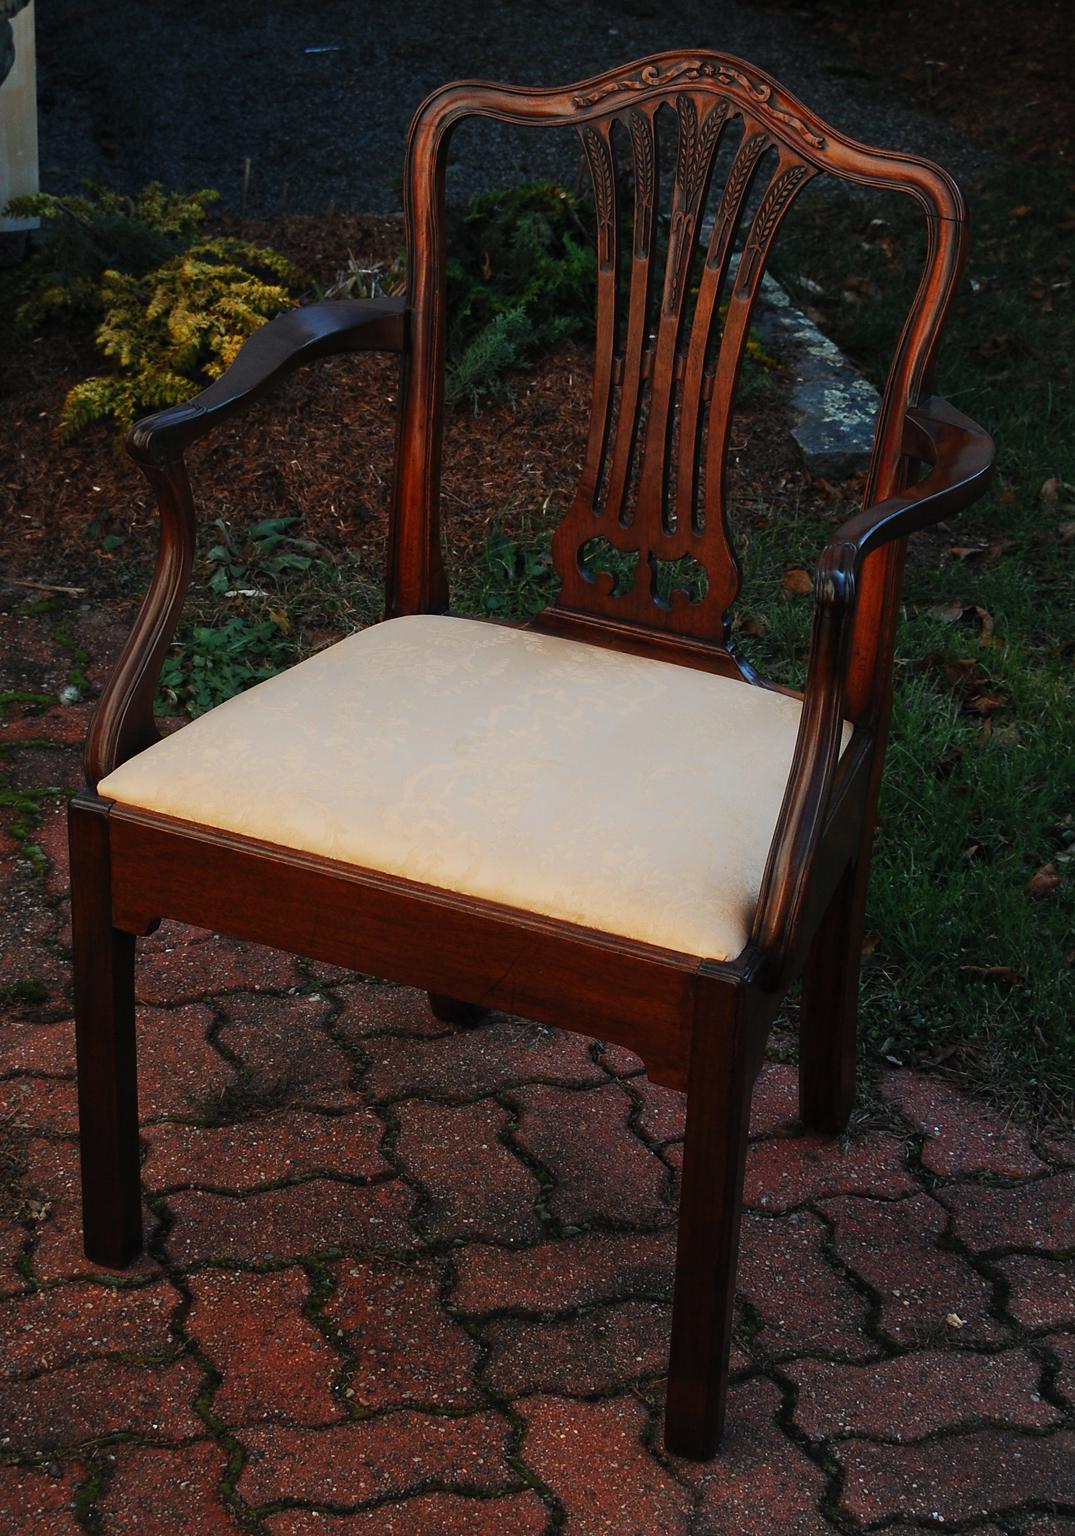 Ref. #4556. English Georgian Hepplewhite mahogany armchair of bold proportions, with wheatsheaf and ribbon carving to the back, and carving to the graceful arms.  The arched top rail and wide pierced carved central splat are well executed as one